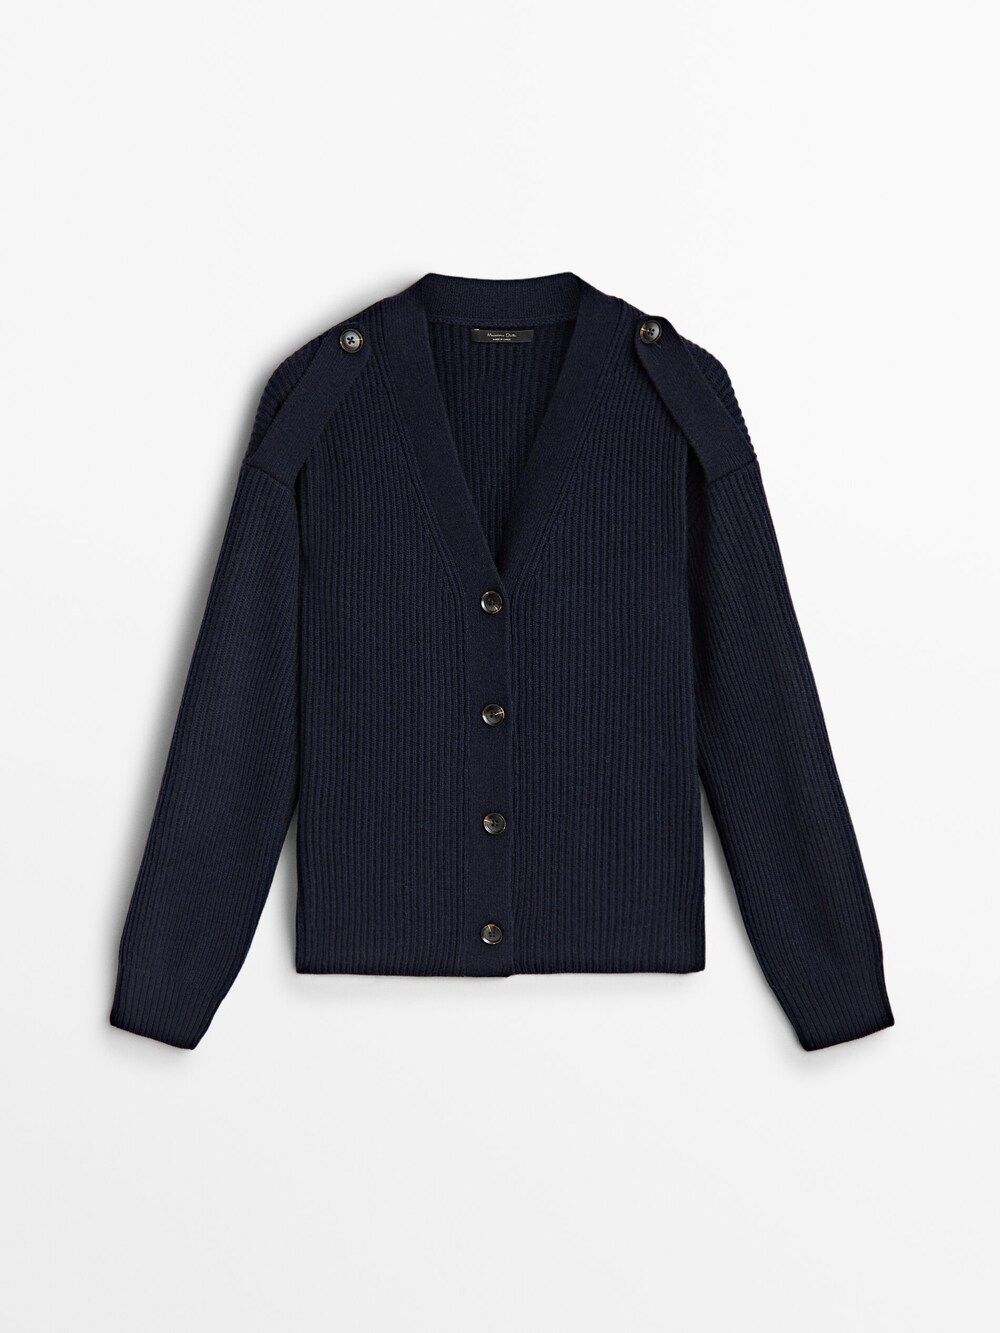 Knit cardigan with buttoned tab detail | Massimo Dutti (US)